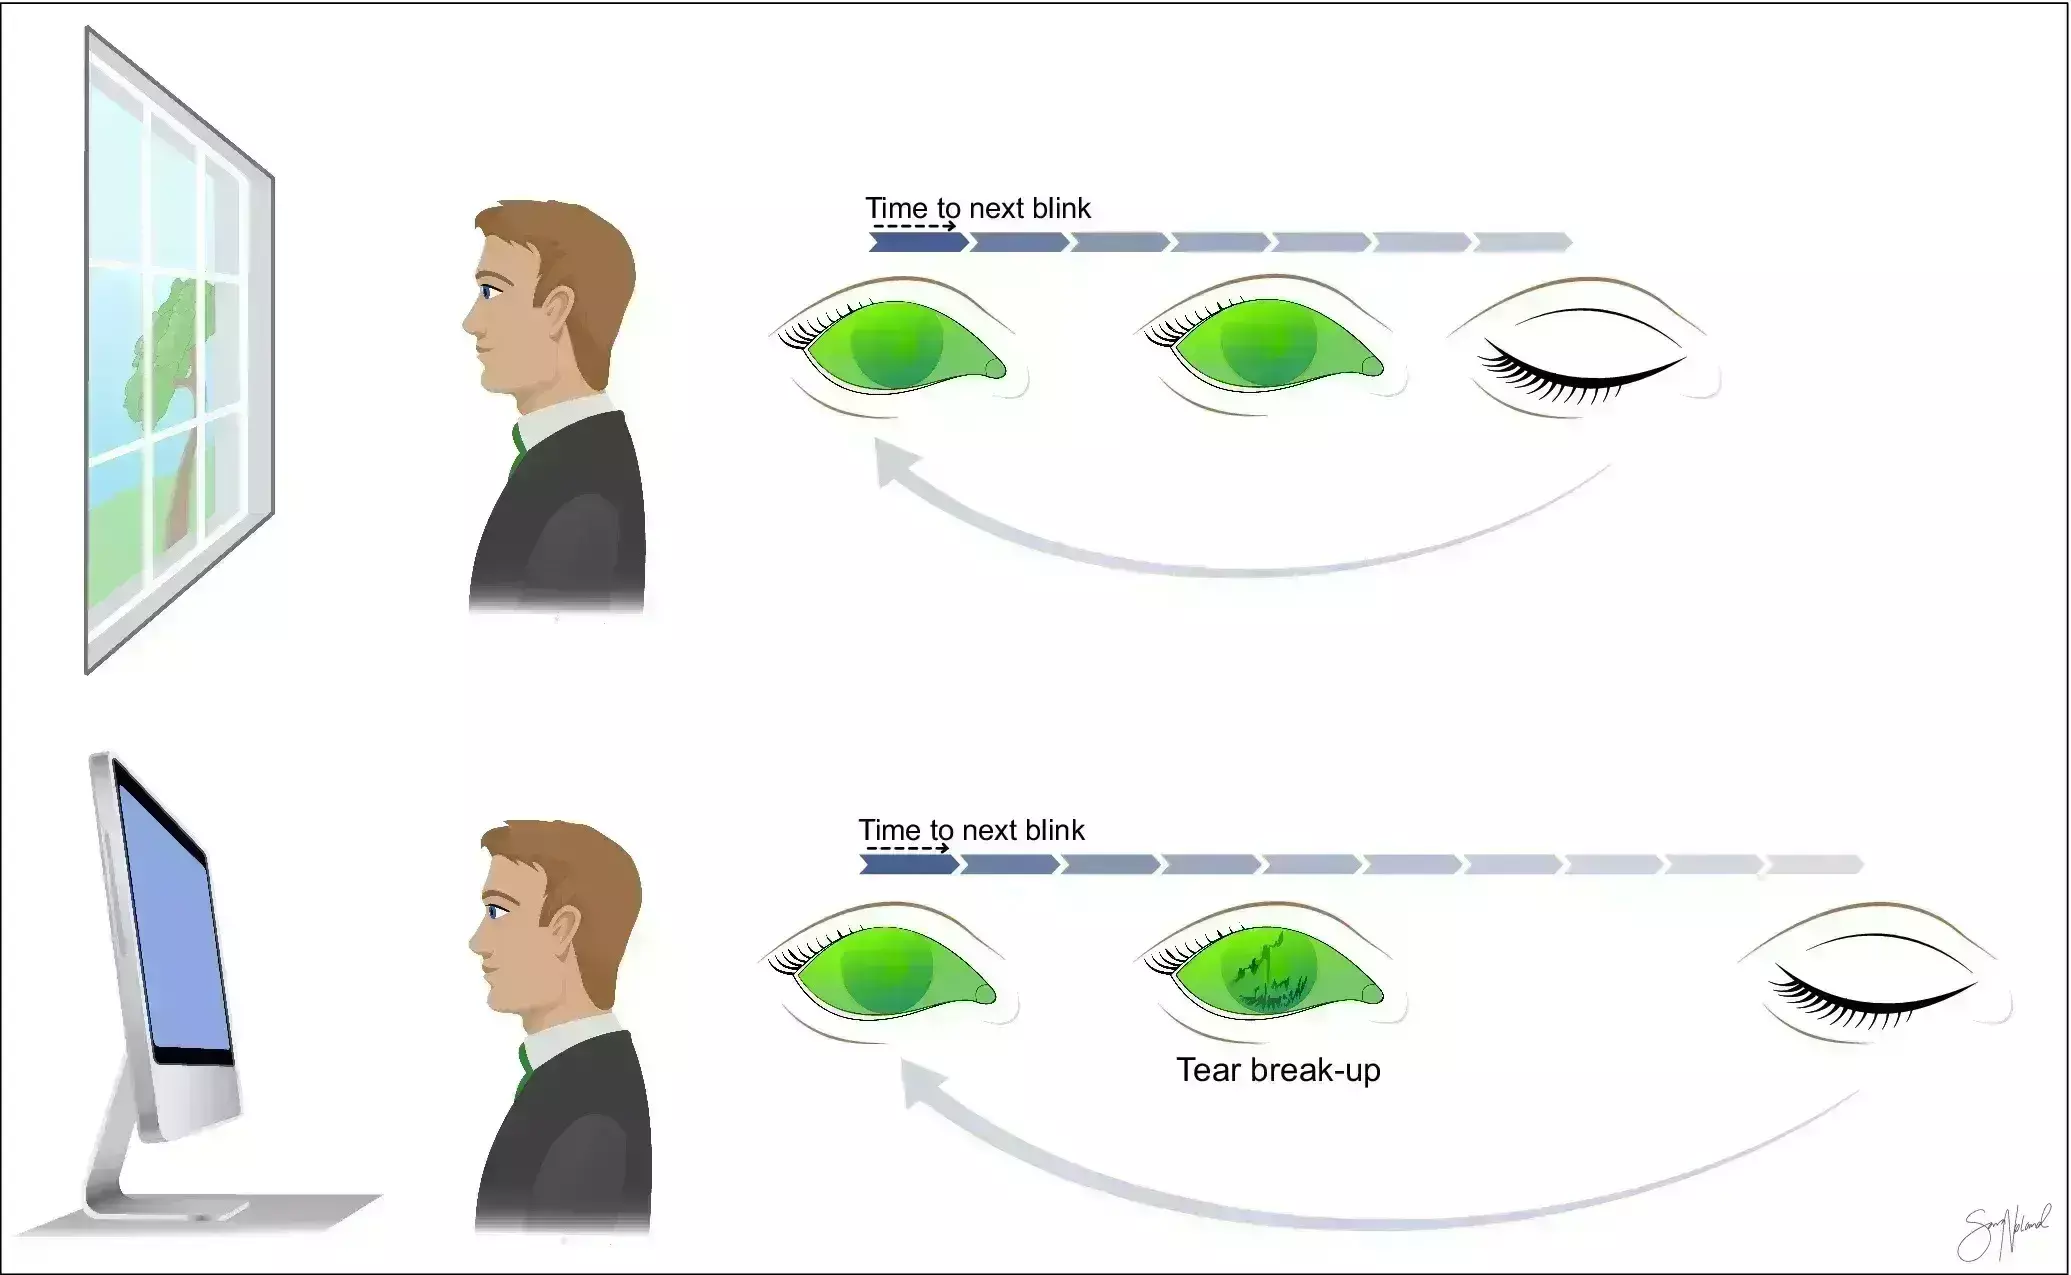 Visual Display Terminal may induce Dry Eye Disease through both direct and indirect routes